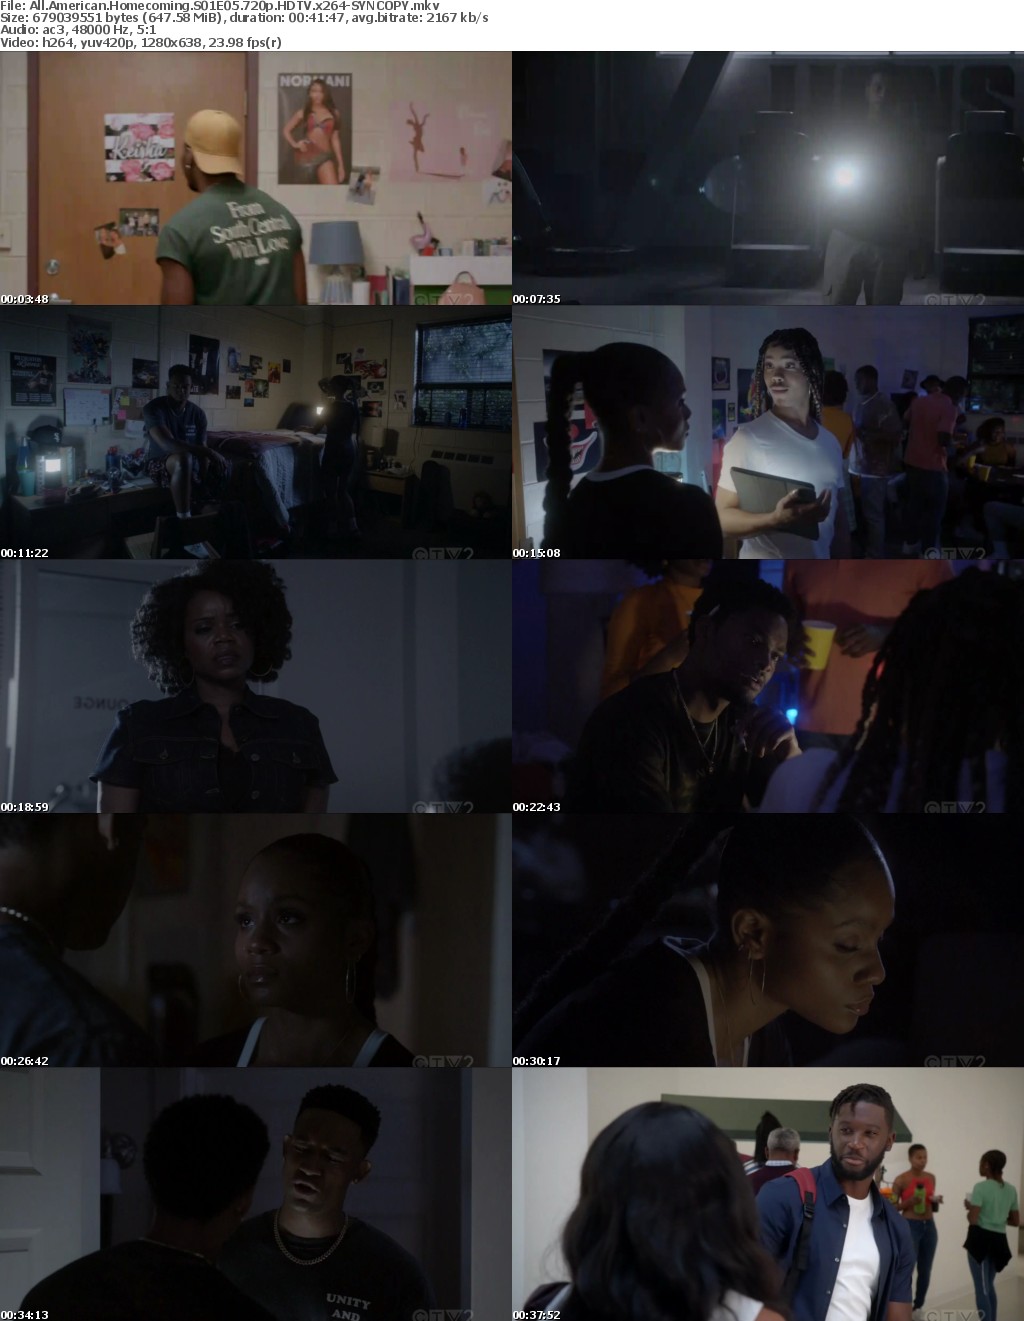 All American Homecoming S01E05 720p HDTV x264-SYNCOPY